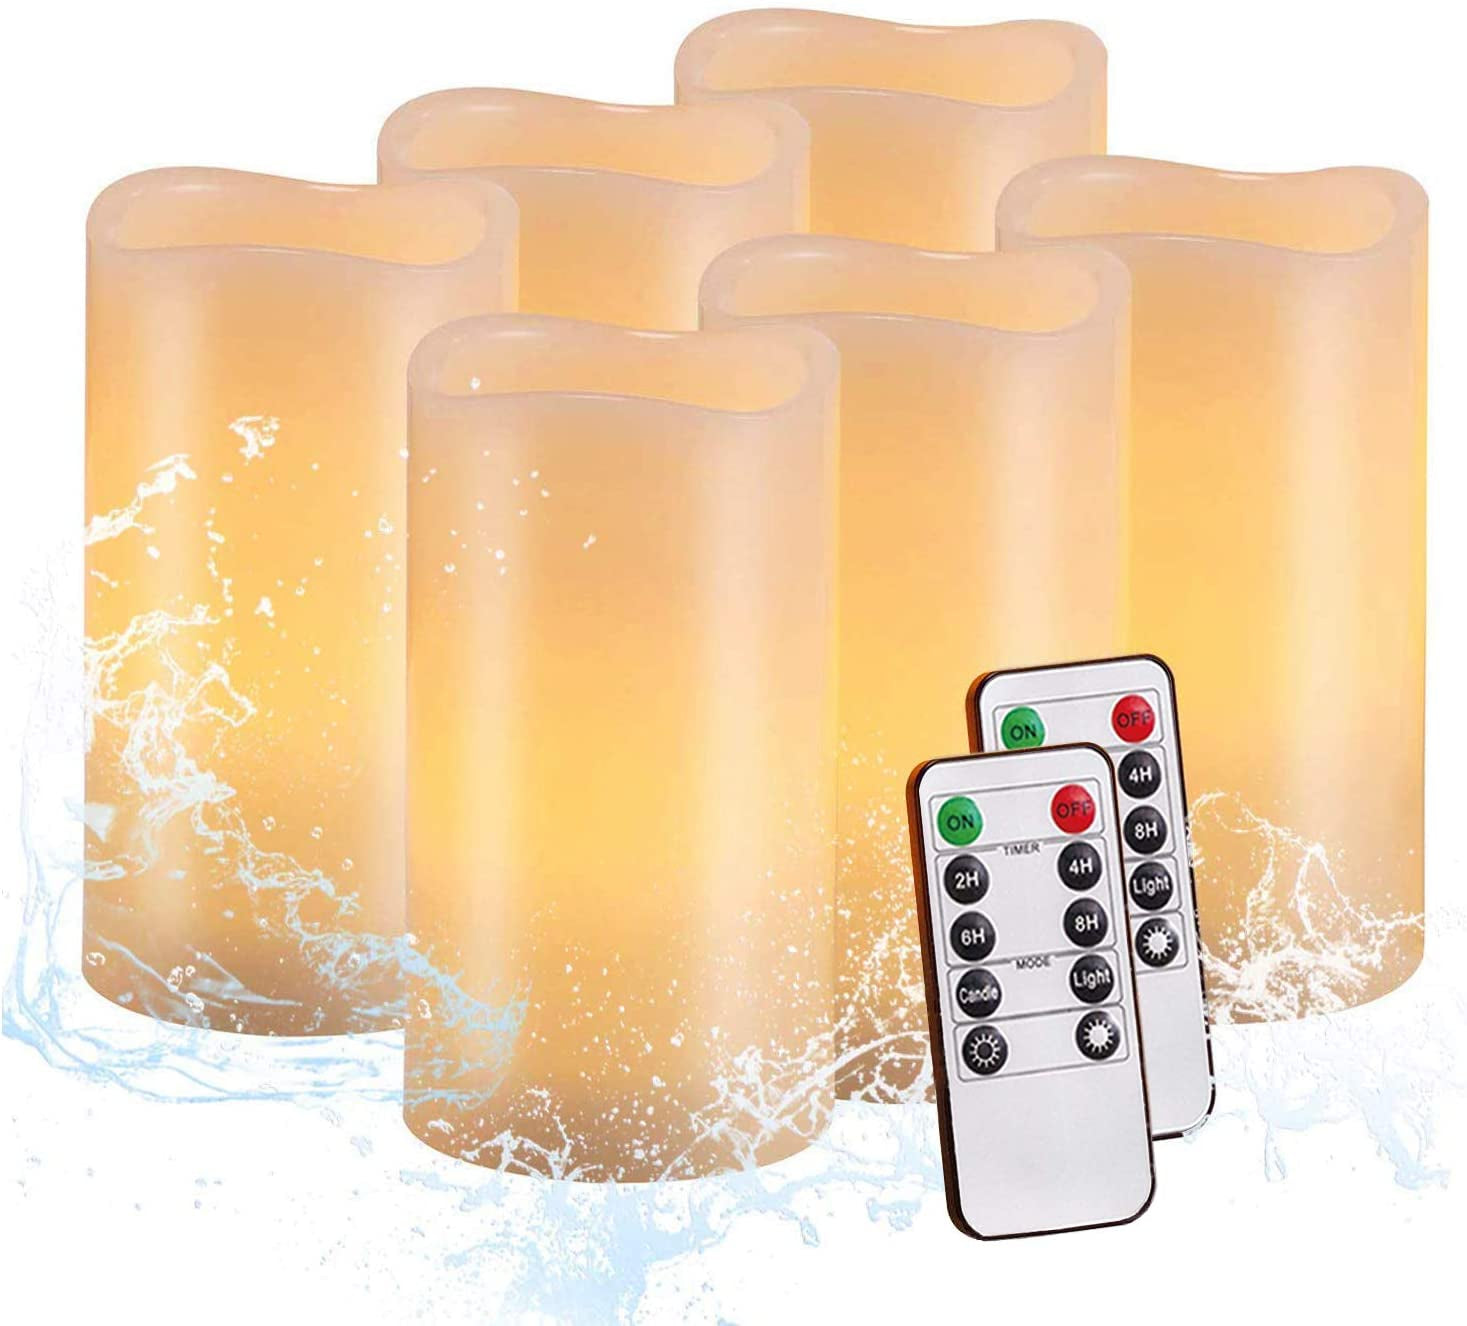 salipt, Flameless Candles,Salipt LED Flickering Candles Set of 6 (H 6" Xd 3") Battery Operated Candles,Waterproof Flameless Candles, Resin Plastic, Indoor Outdoor Use, Batteries Included, Lvory Tend Yellow